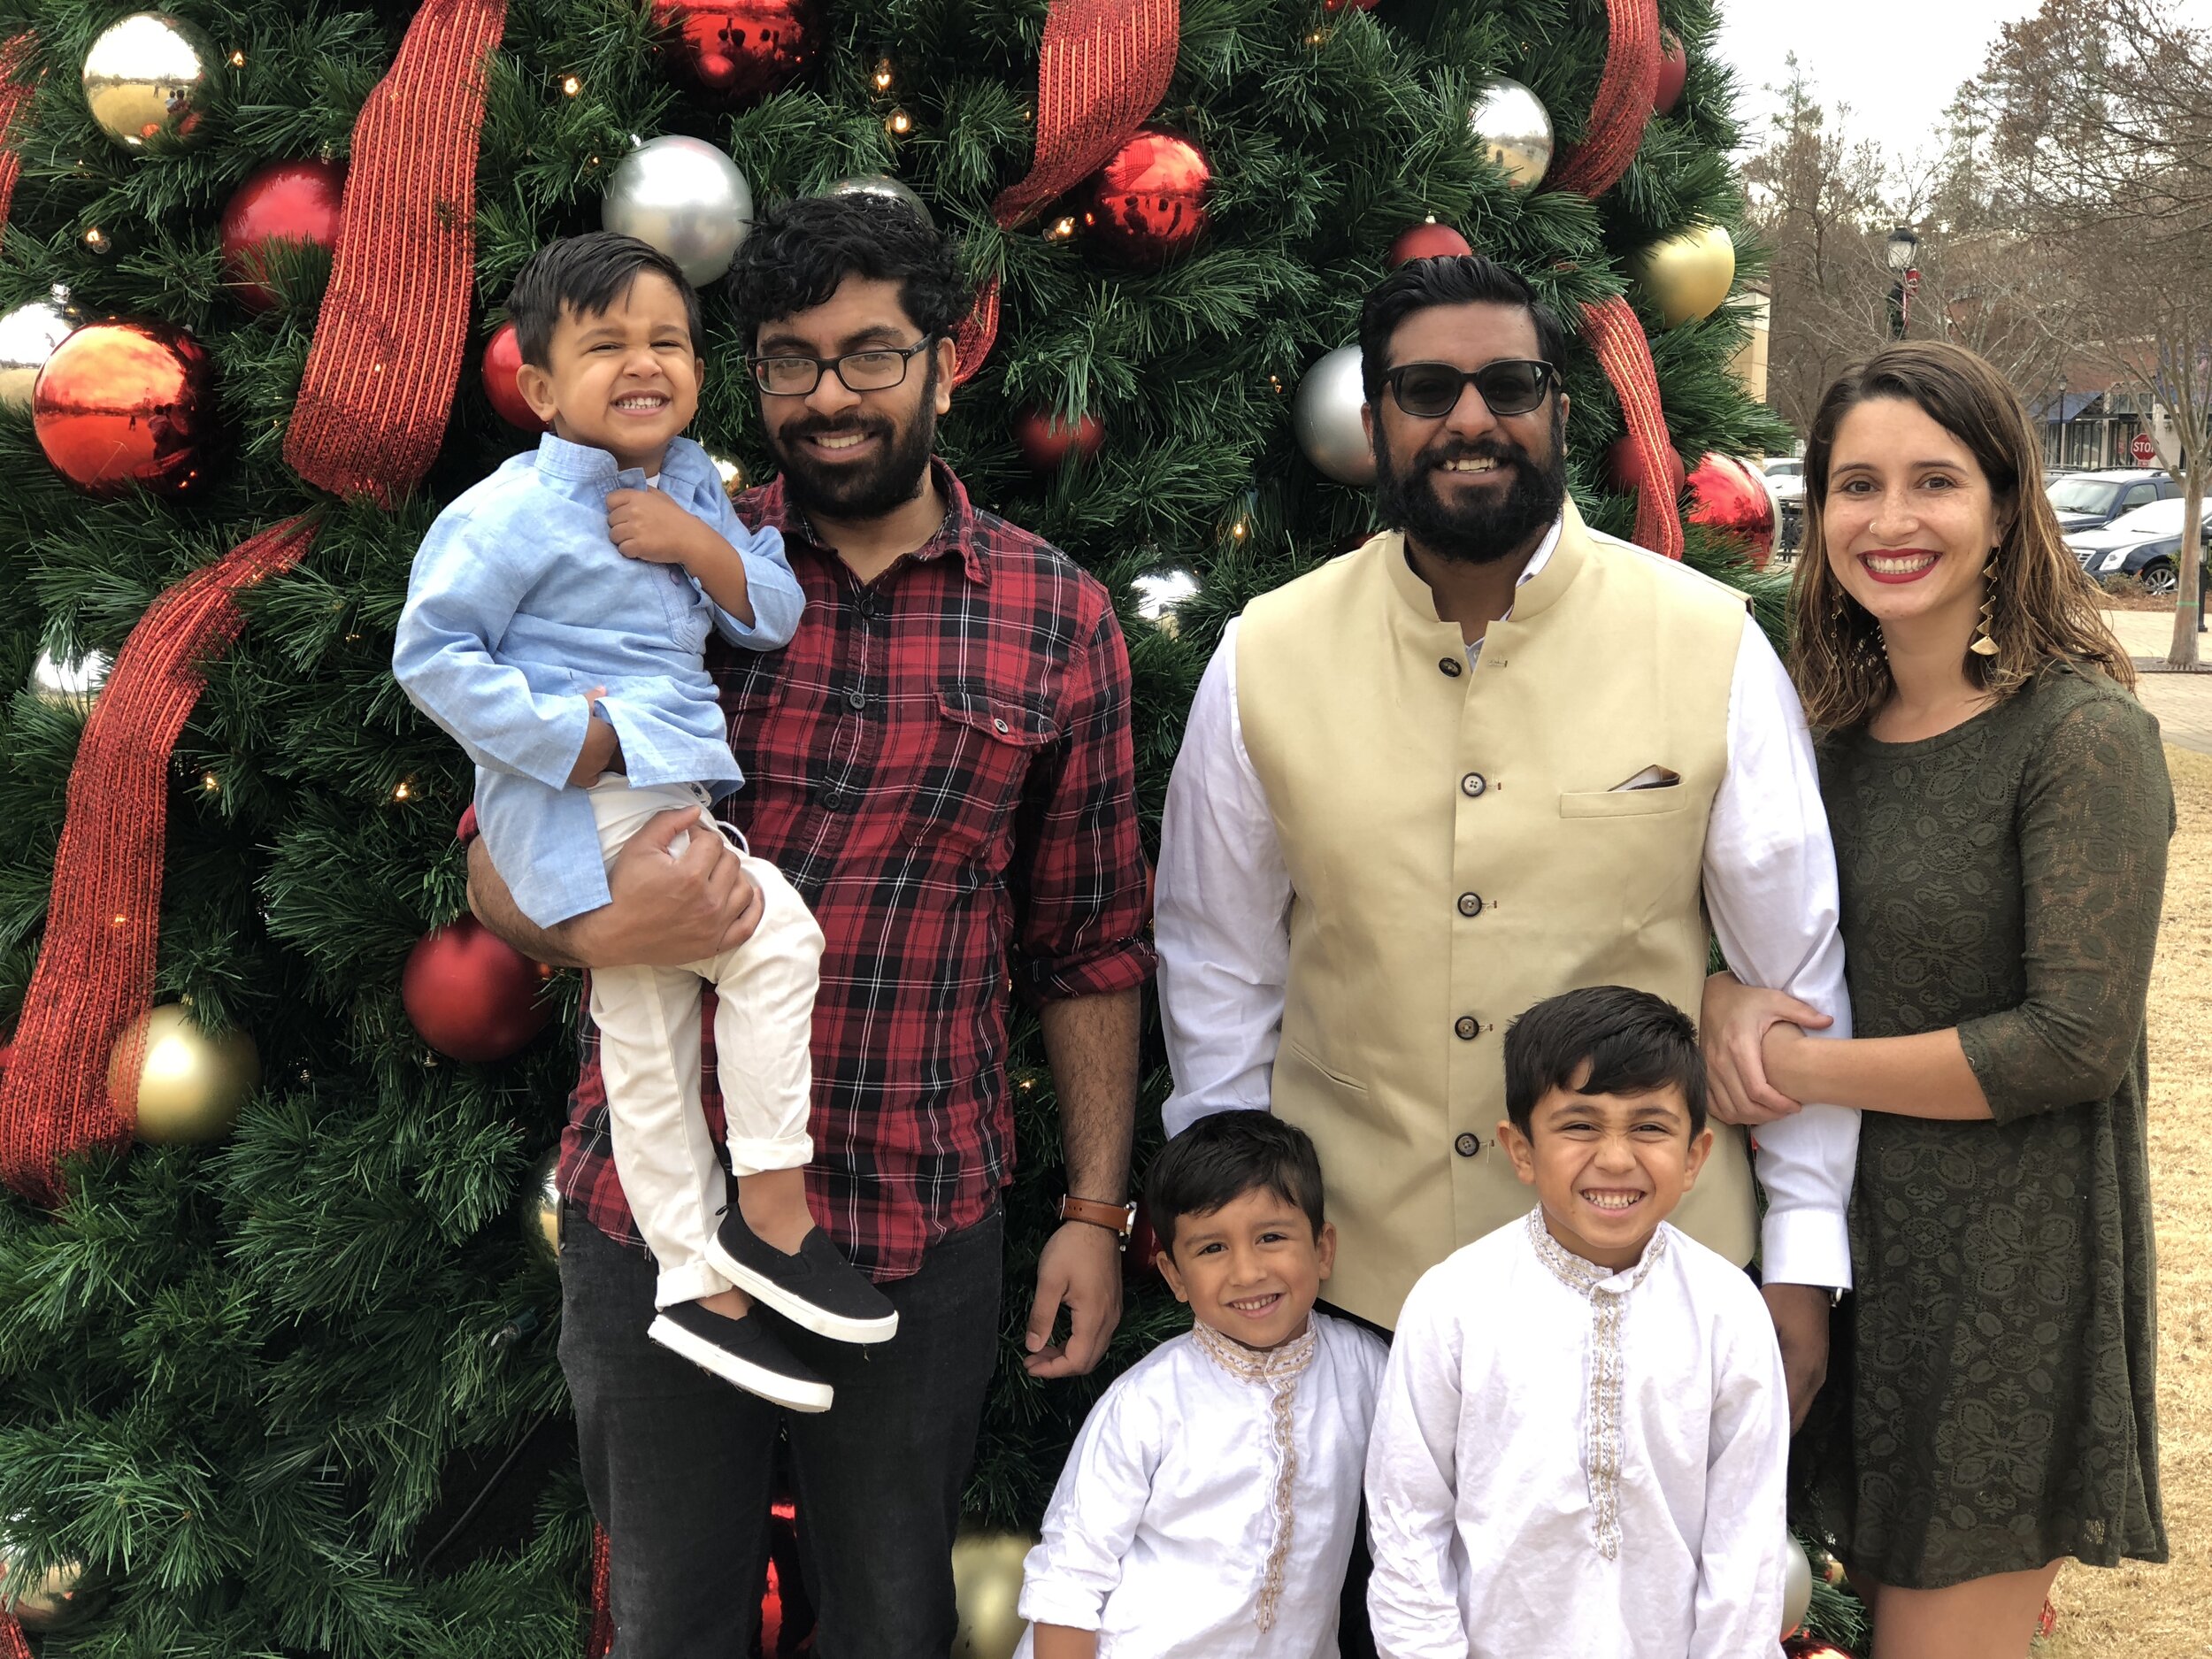 Our Multiethnic Family's Christmas Bucket List